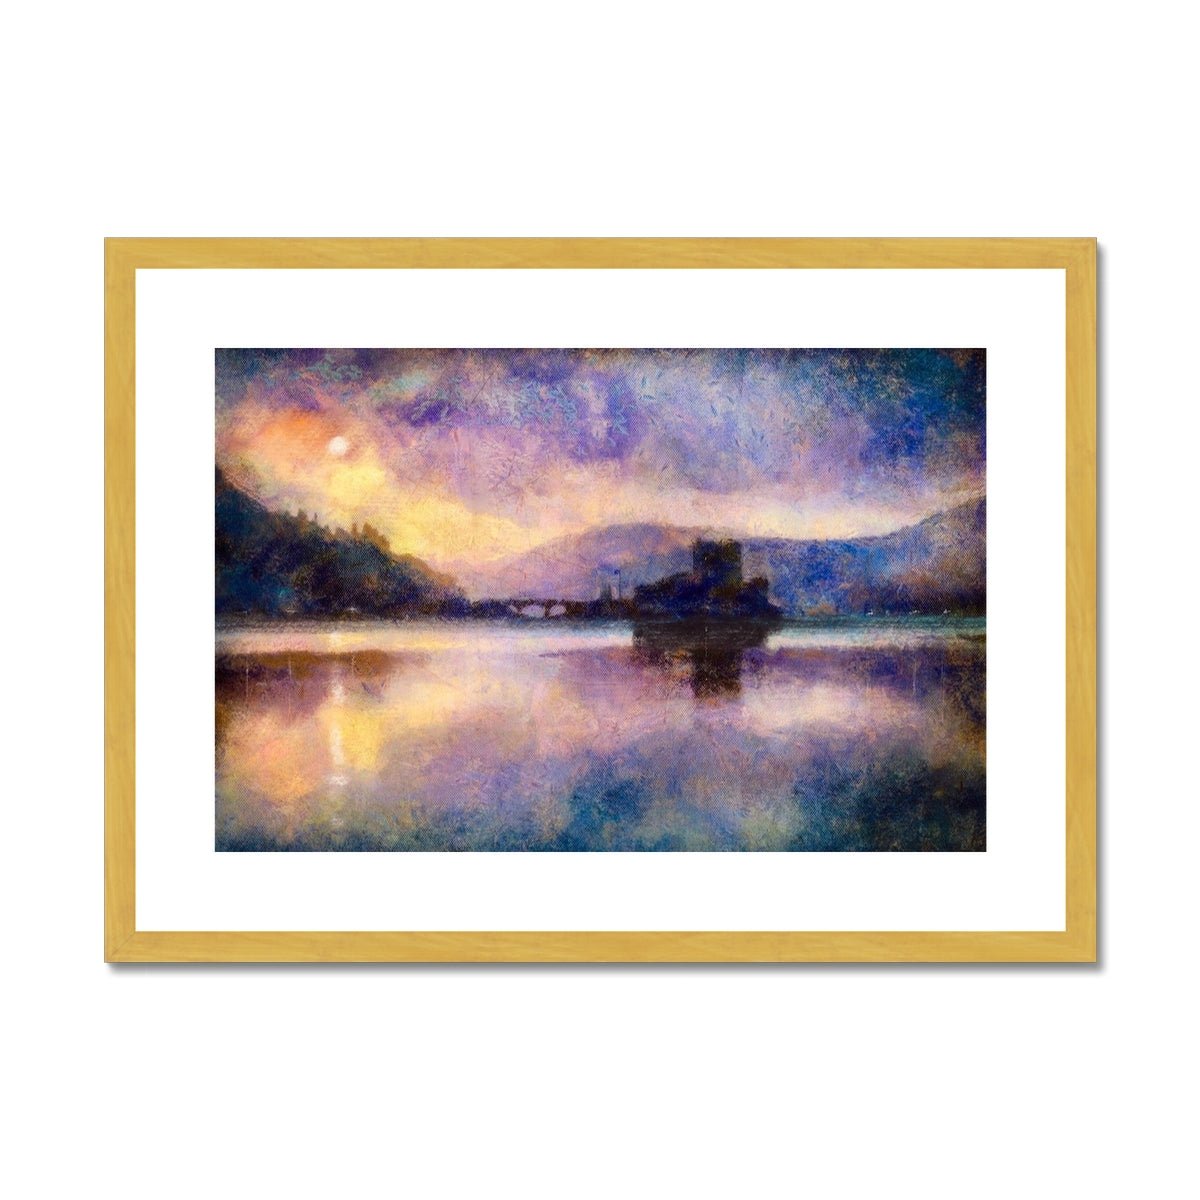 Eilean Donan Castle Moonlight Painting | Antique Framed & Mounted Prints From Scotland-Antique Framed & Mounted Prints-Historic & Iconic Scotland Art Gallery-A2 Landscape-Gold Frame-Paintings, Prints, Homeware, Art Gifts From Scotland By Scottish Artist Kevin Hunter